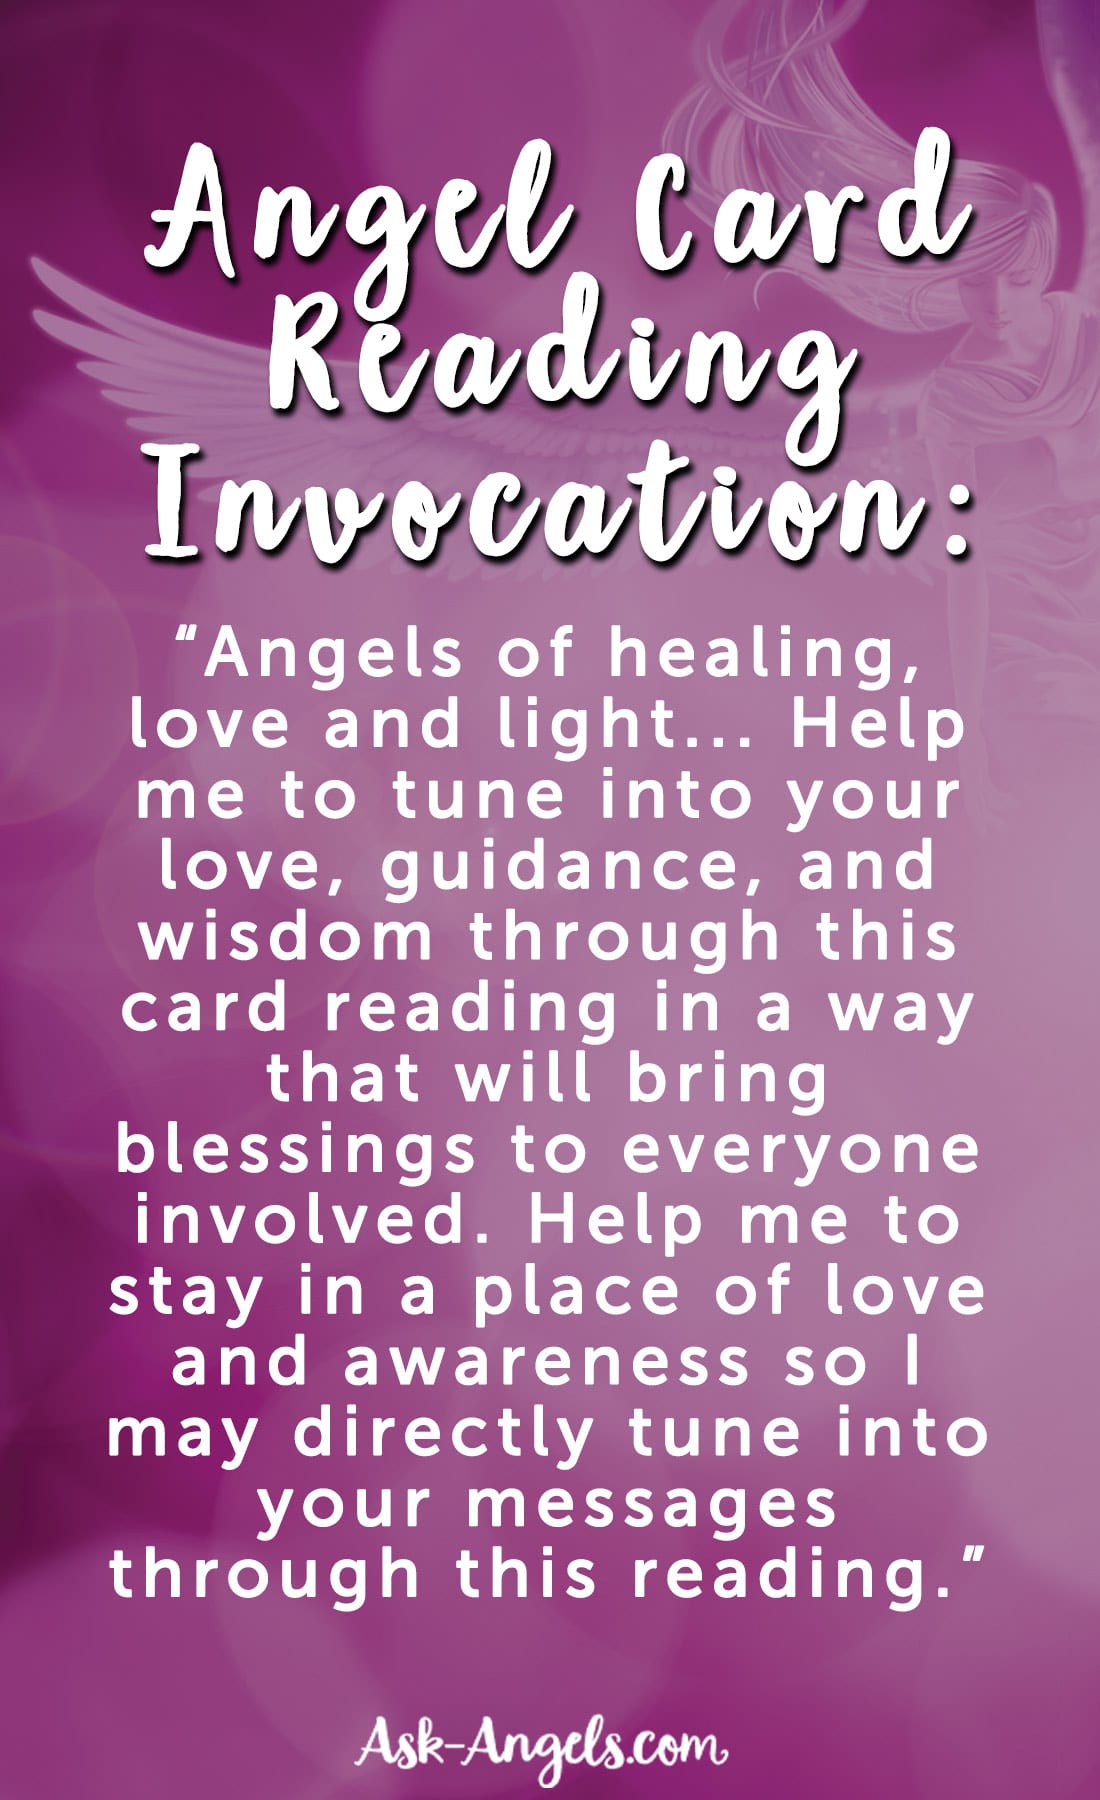 Angel Card Reading Invocation